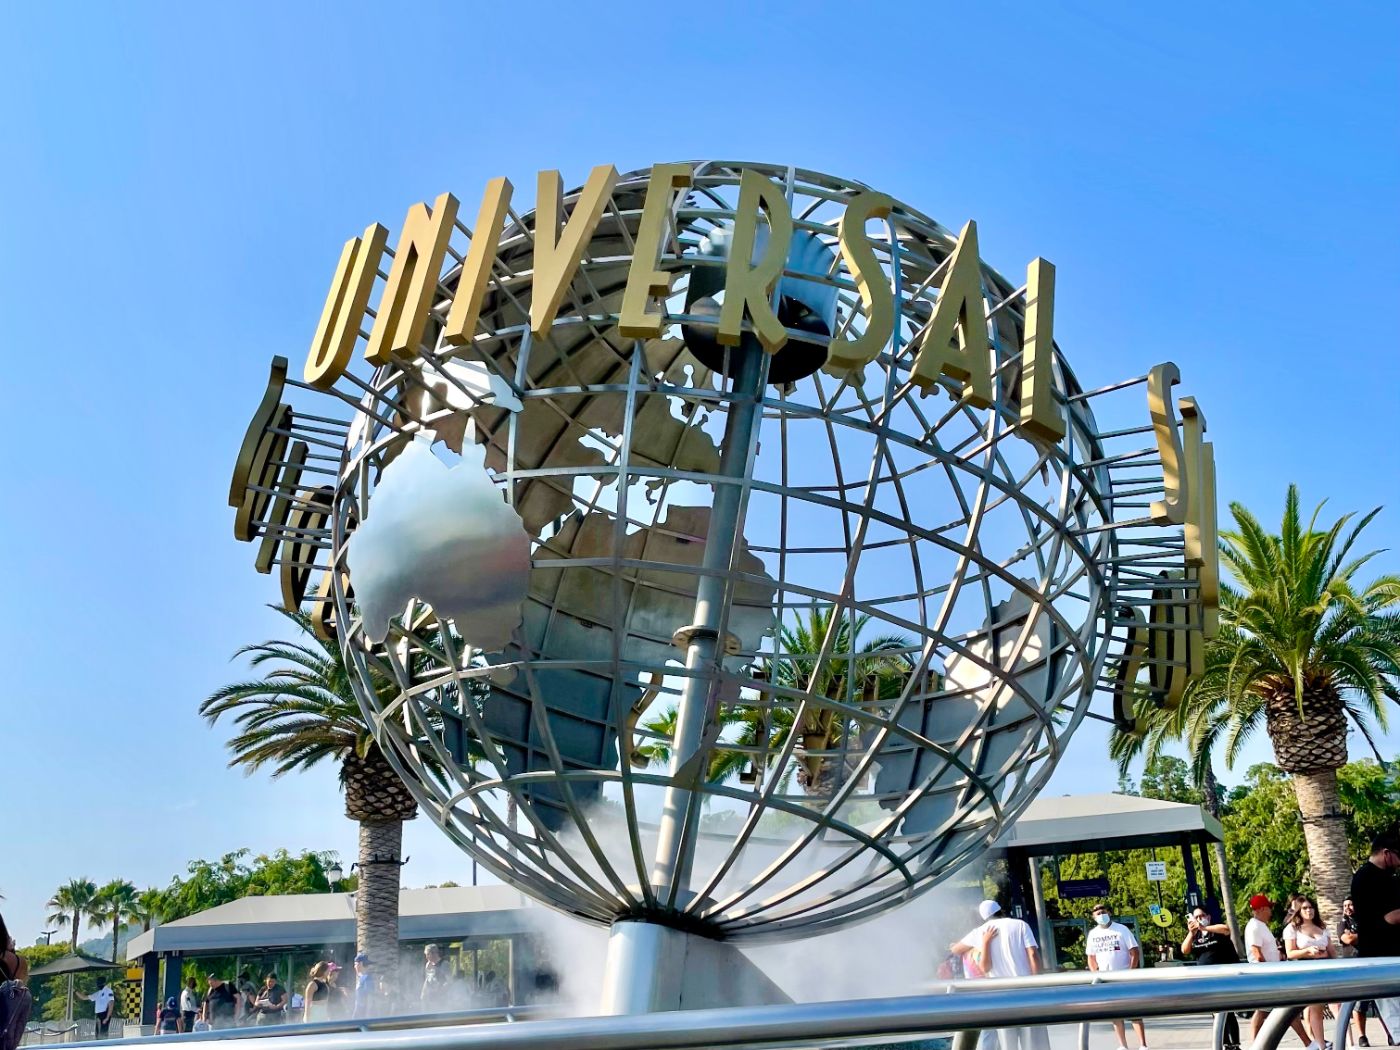 Universal Studios Hollywood Attractions Ranked! - Coaster101